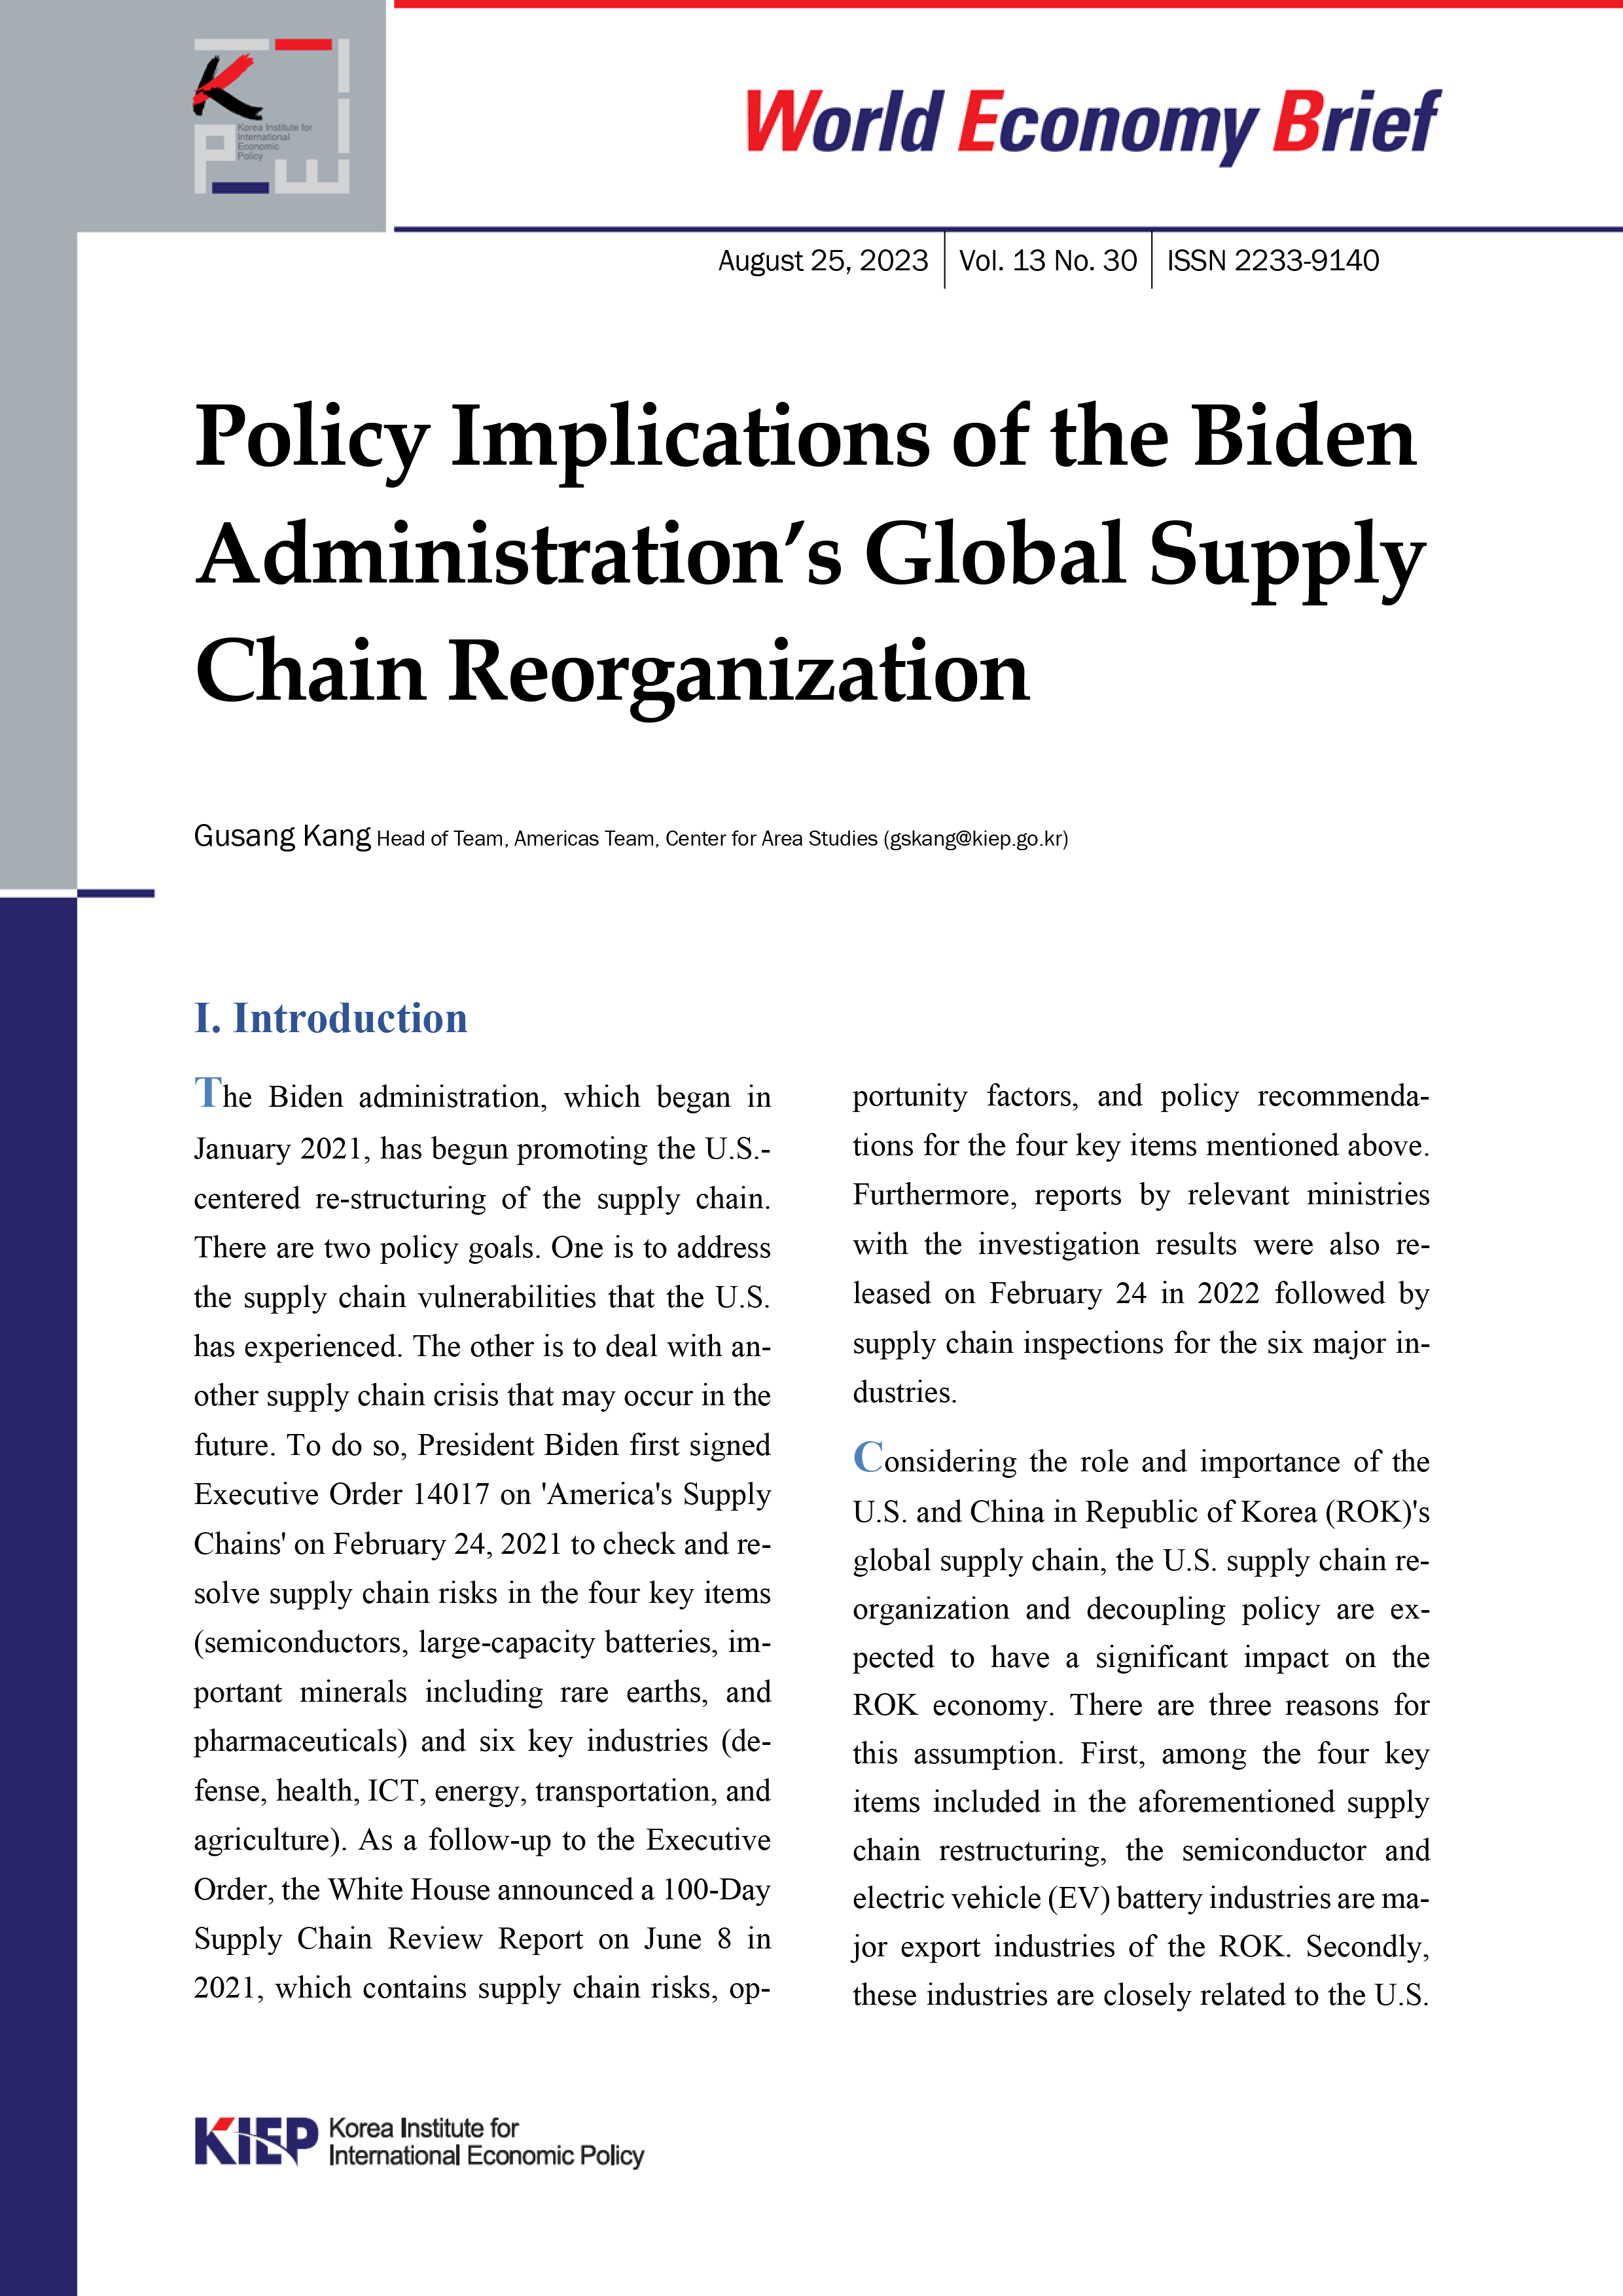 Policy Implications of the Biden Administration’s Global Supply Chain Reorganization